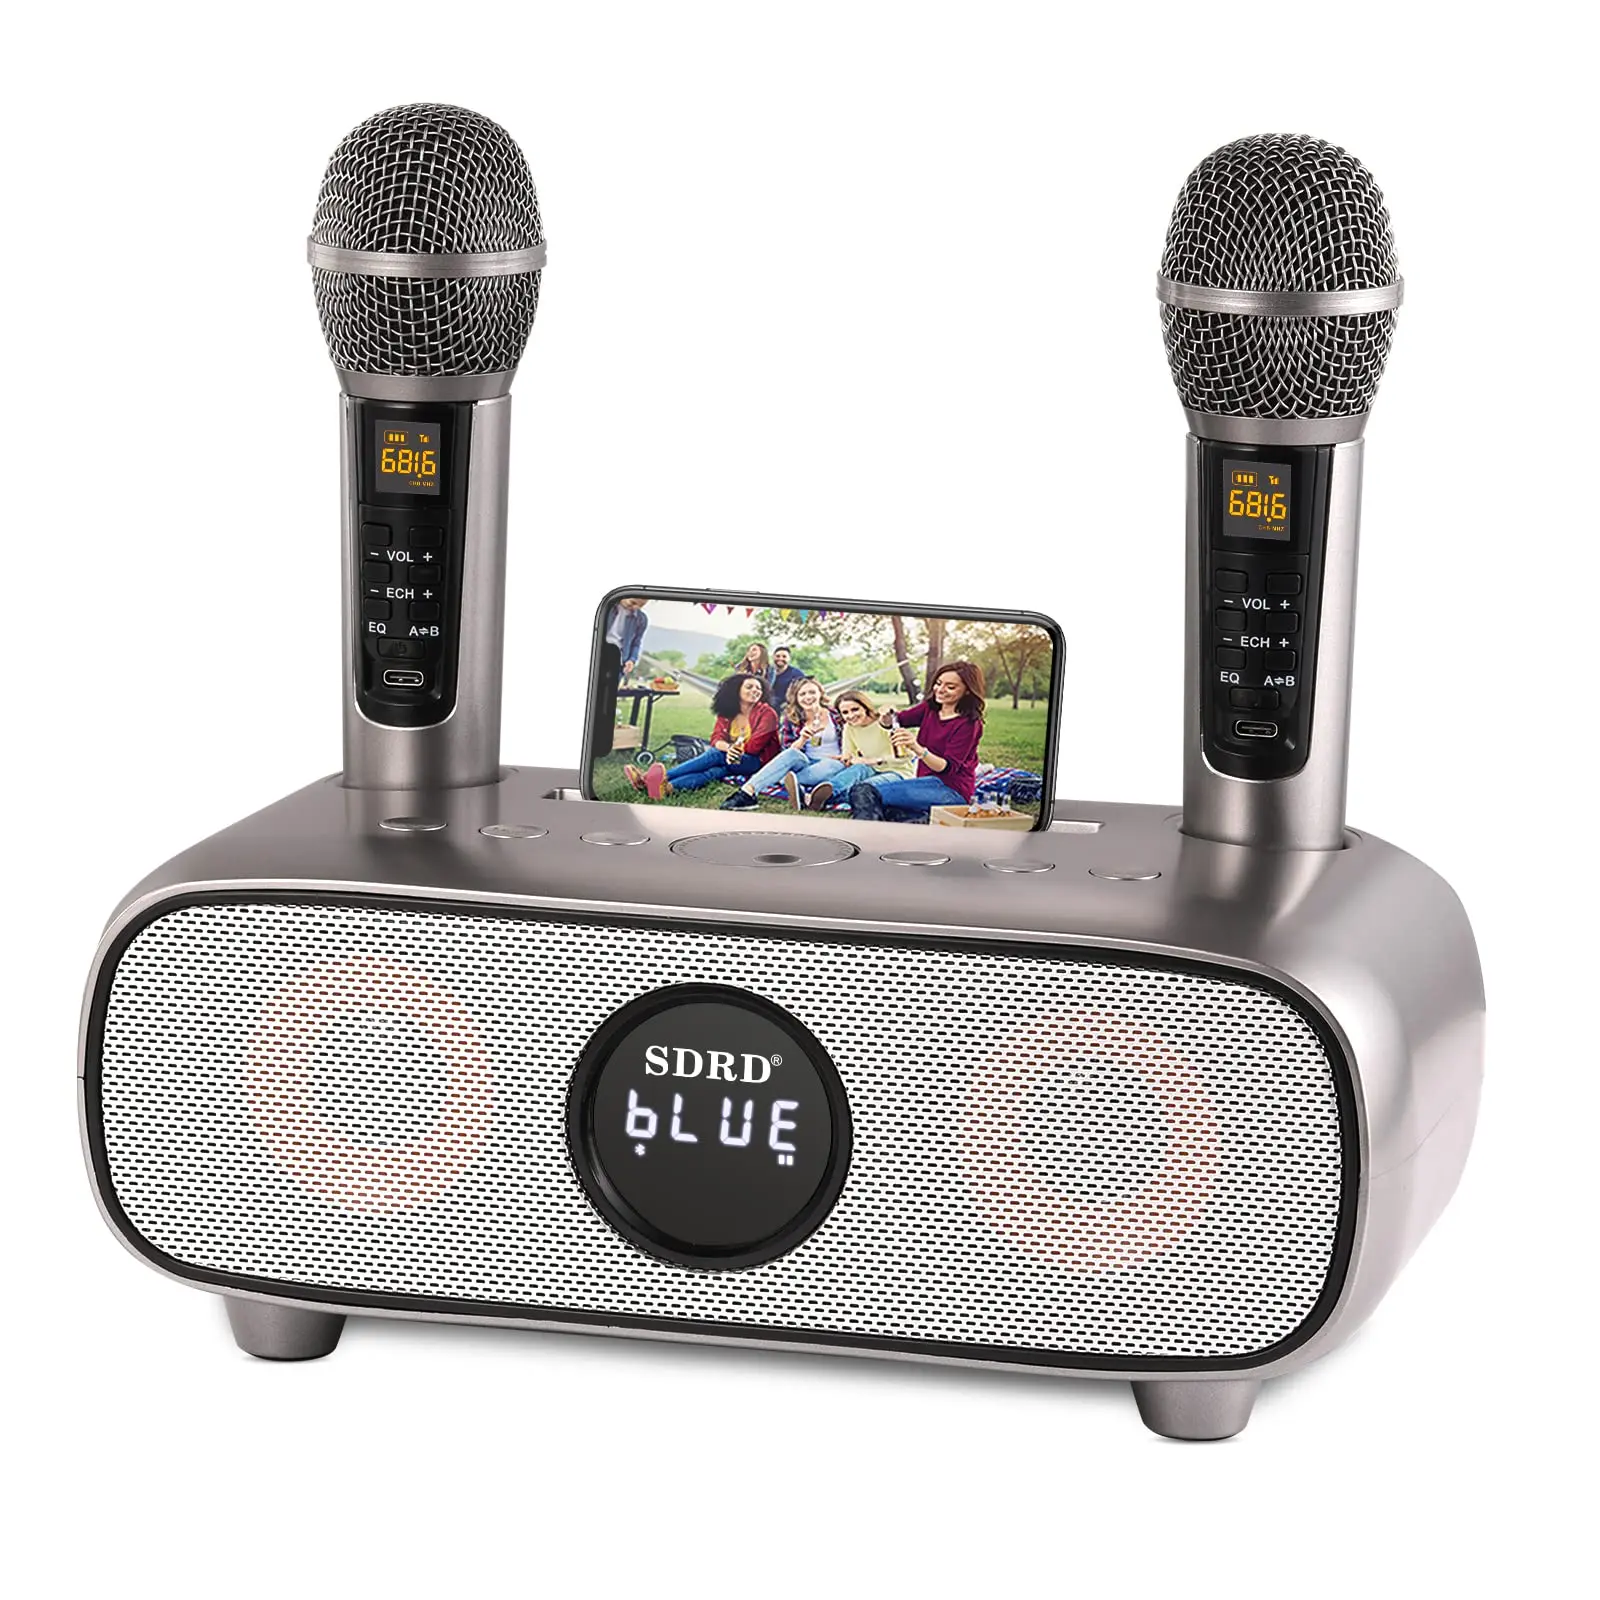 

SDRD SD316 Portable Bluetooth Karaoke Speakers with Two Wireless Mic Outdoor Mobile Home KTV Suite Supports TF Card USB/AUX Play